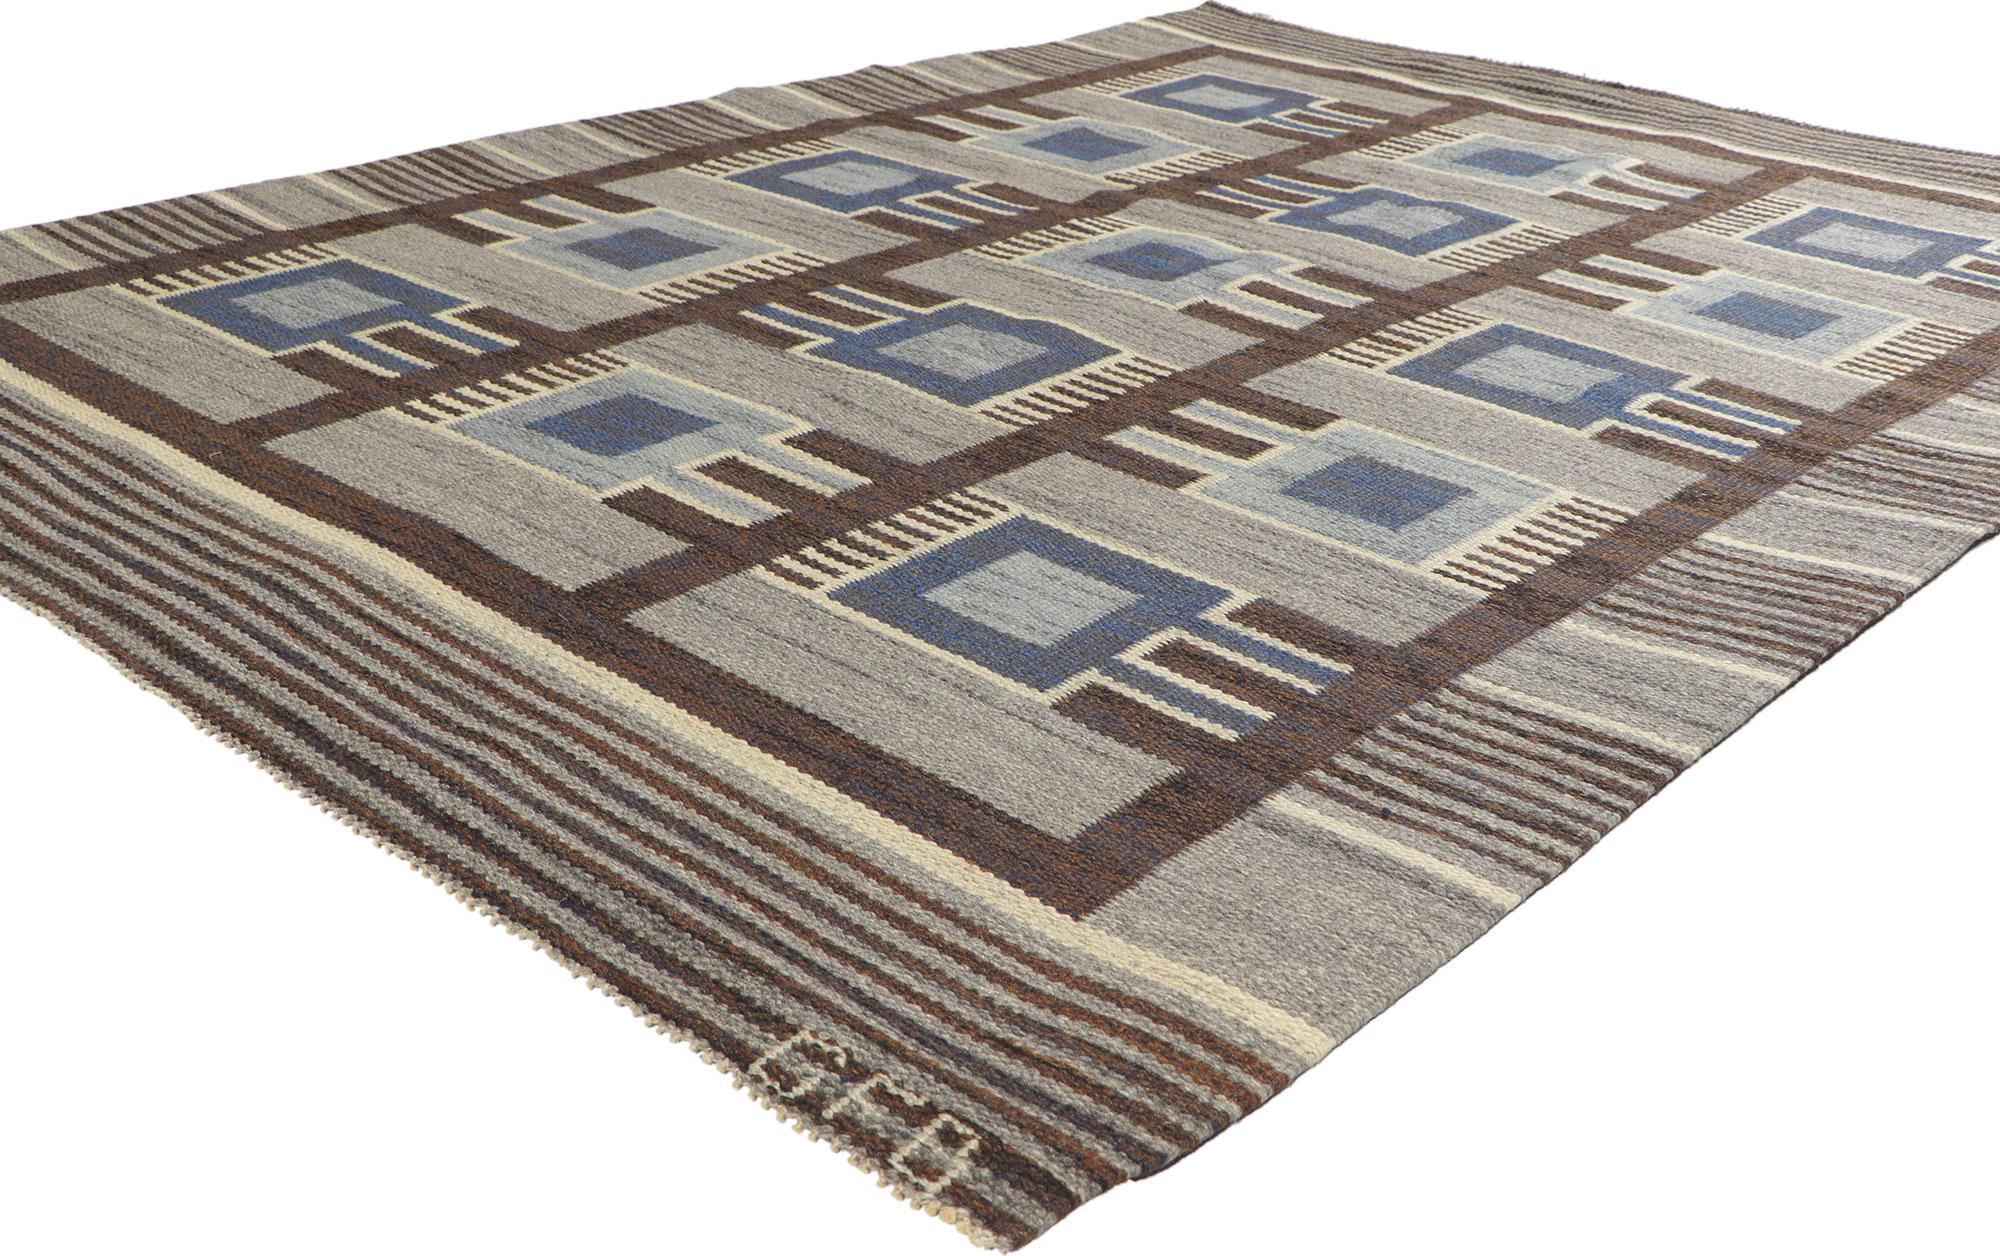 78484 Vintage Swedish Kilim Rollakan Rug, 04'11 x 06'10. ?Emanating Scandinavian Modern Design with incredible detail and texture, this handwoven wool vintage Swedish rollakan rug is a captivating vision of woven beauty. The geometric design and